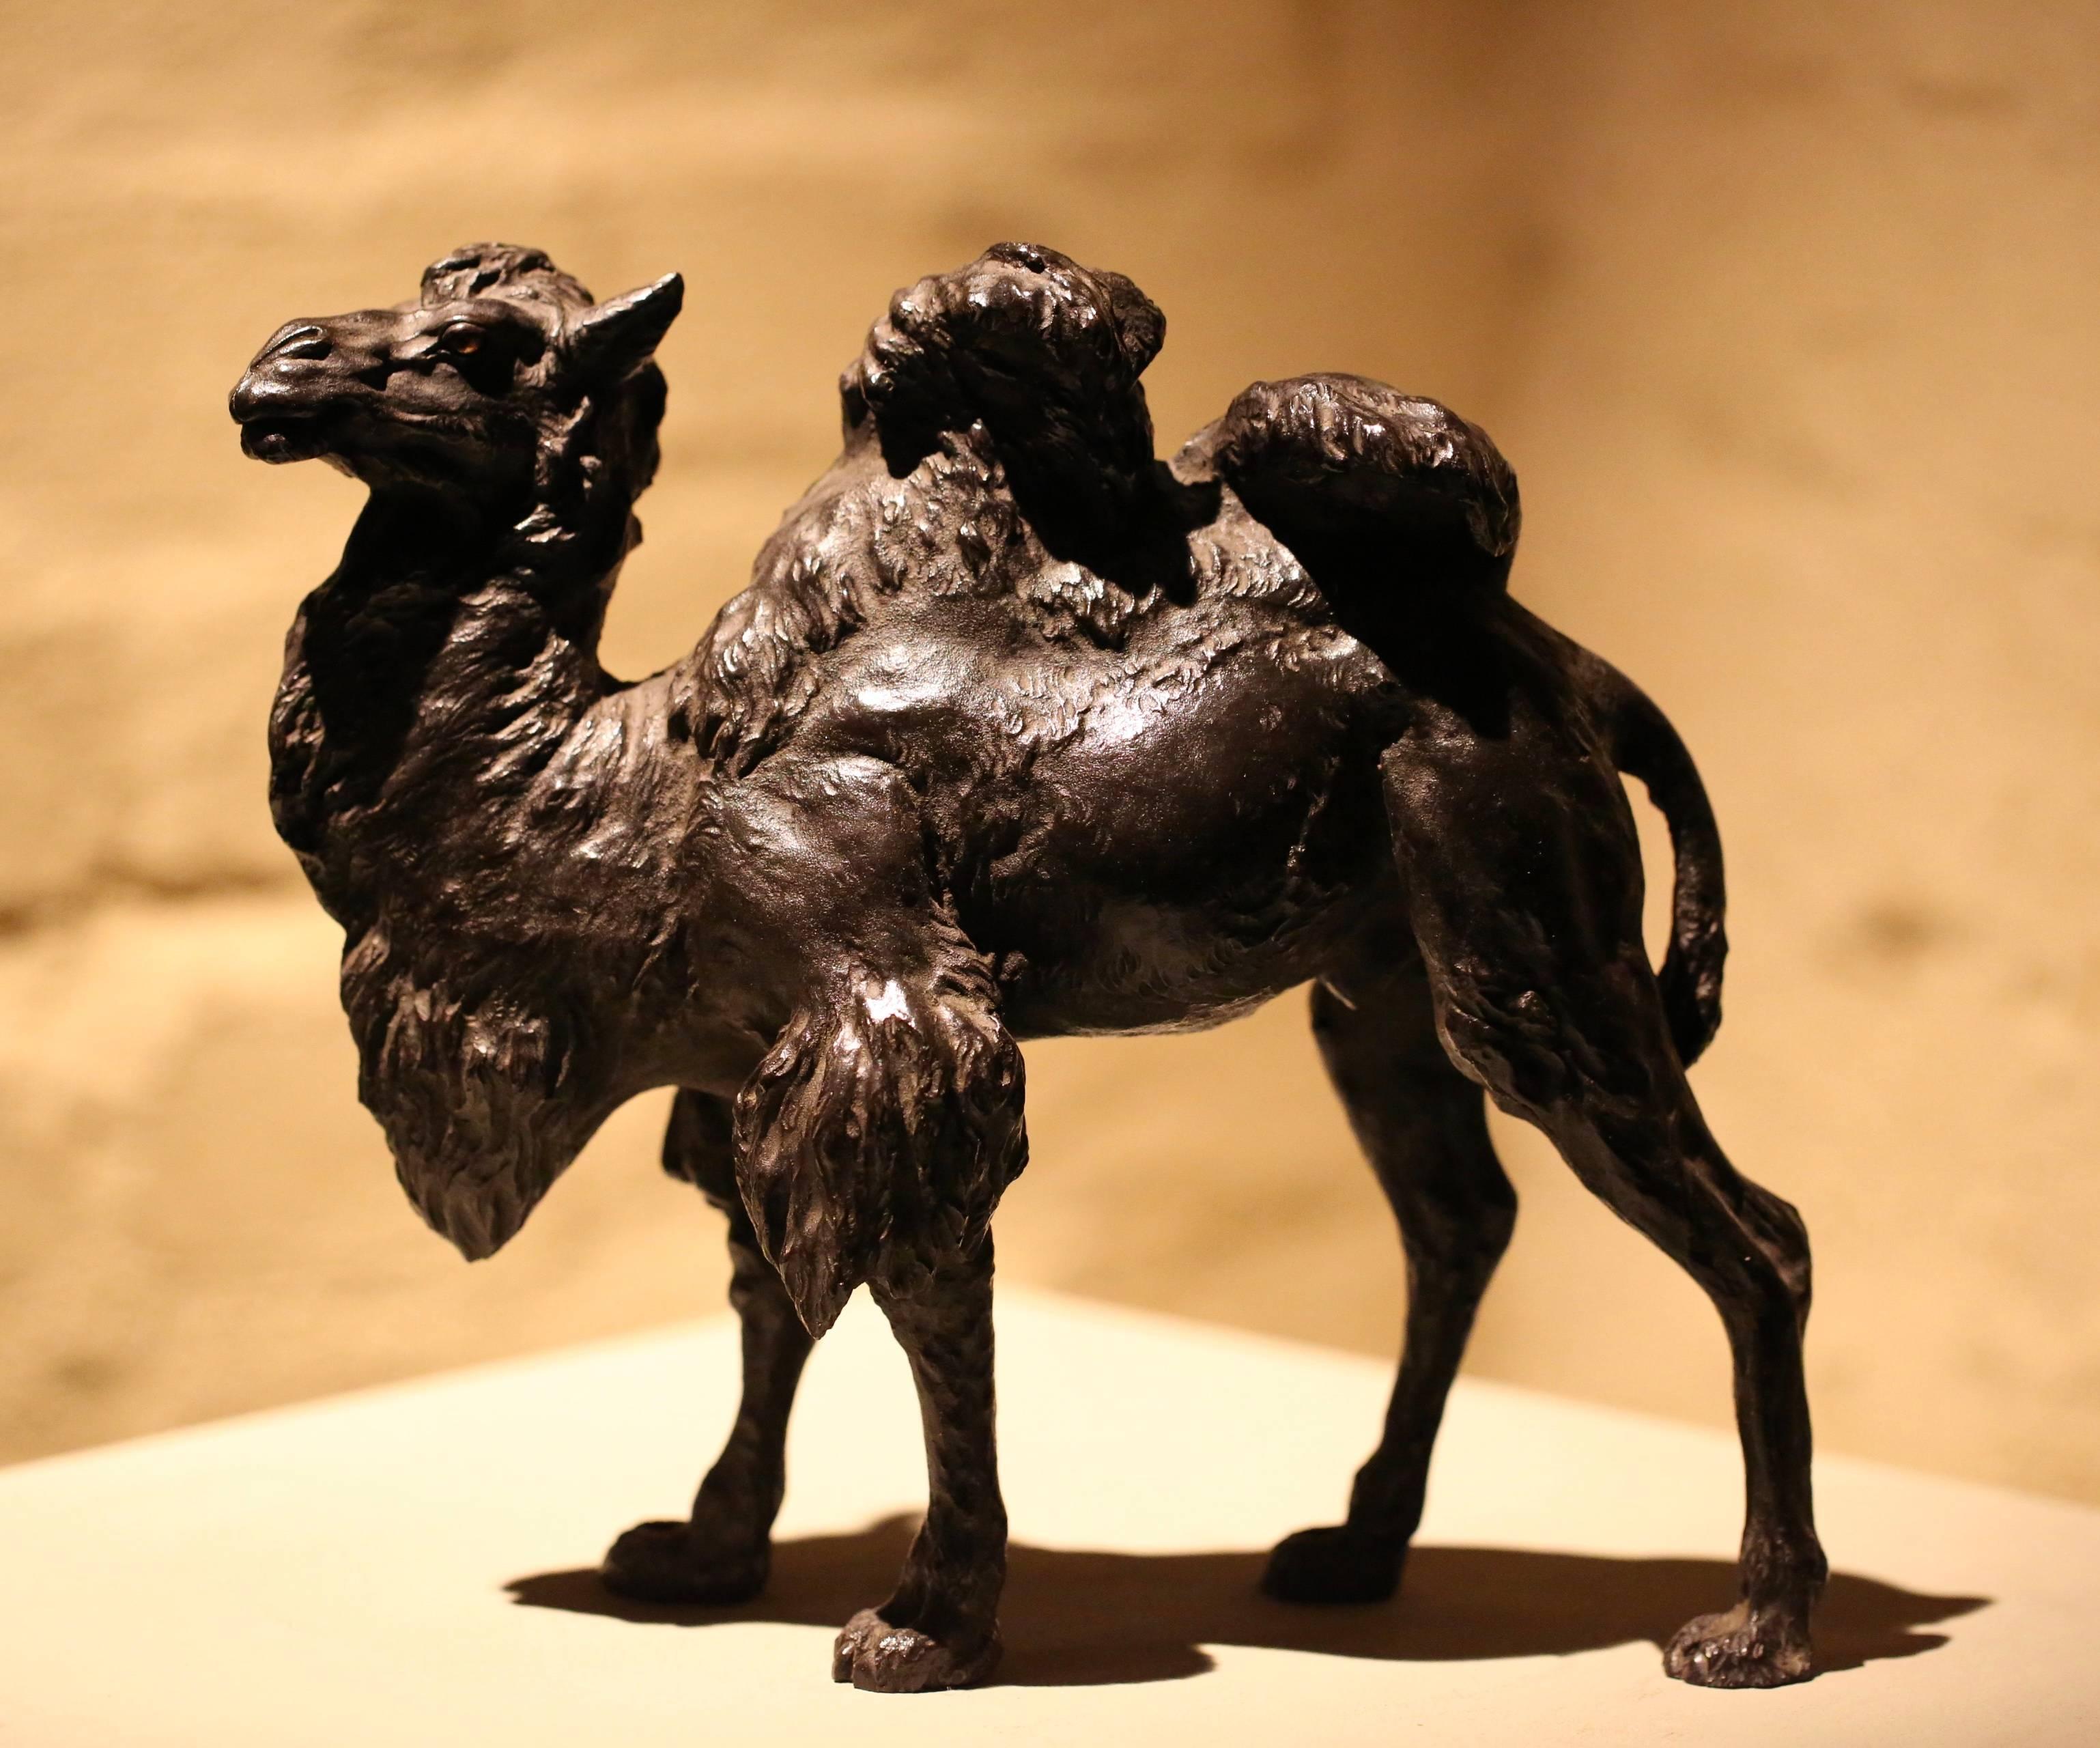 A fine quality Japanese Meiji period Tokyo School bronze model of a Bactrian camel, standing upright, looking forward. With variable treatment of the bronze finish to depict the varying lengths and textures of its coat across different areas of its